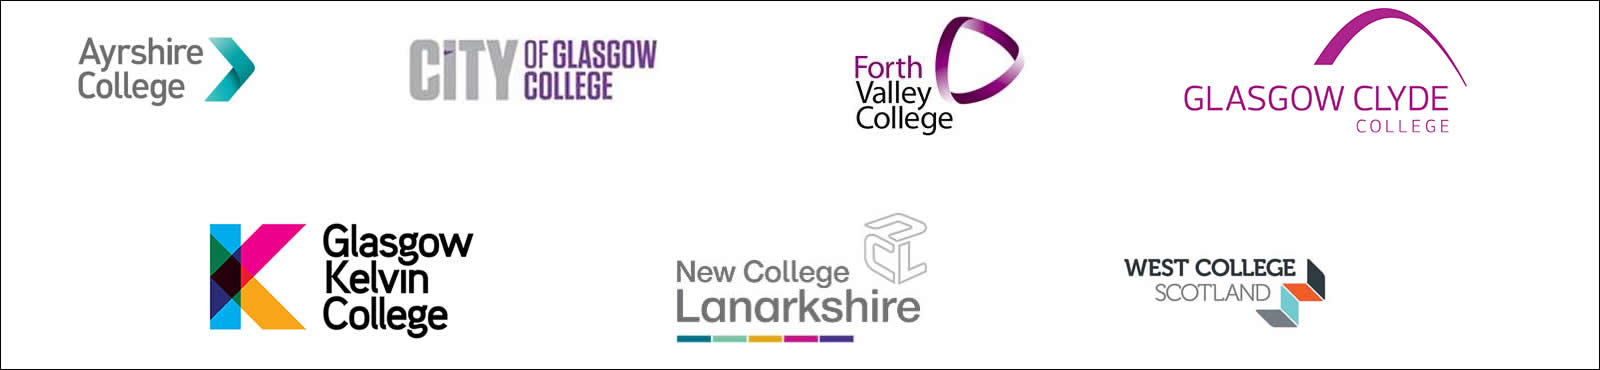 Engineering academy college partners logos - Ayrshire College, City of Glasgow College, Forth Valley College, Glasgow Clyde College, Glasgow Kelvin College, New College Lanarkshire, West College Scotland